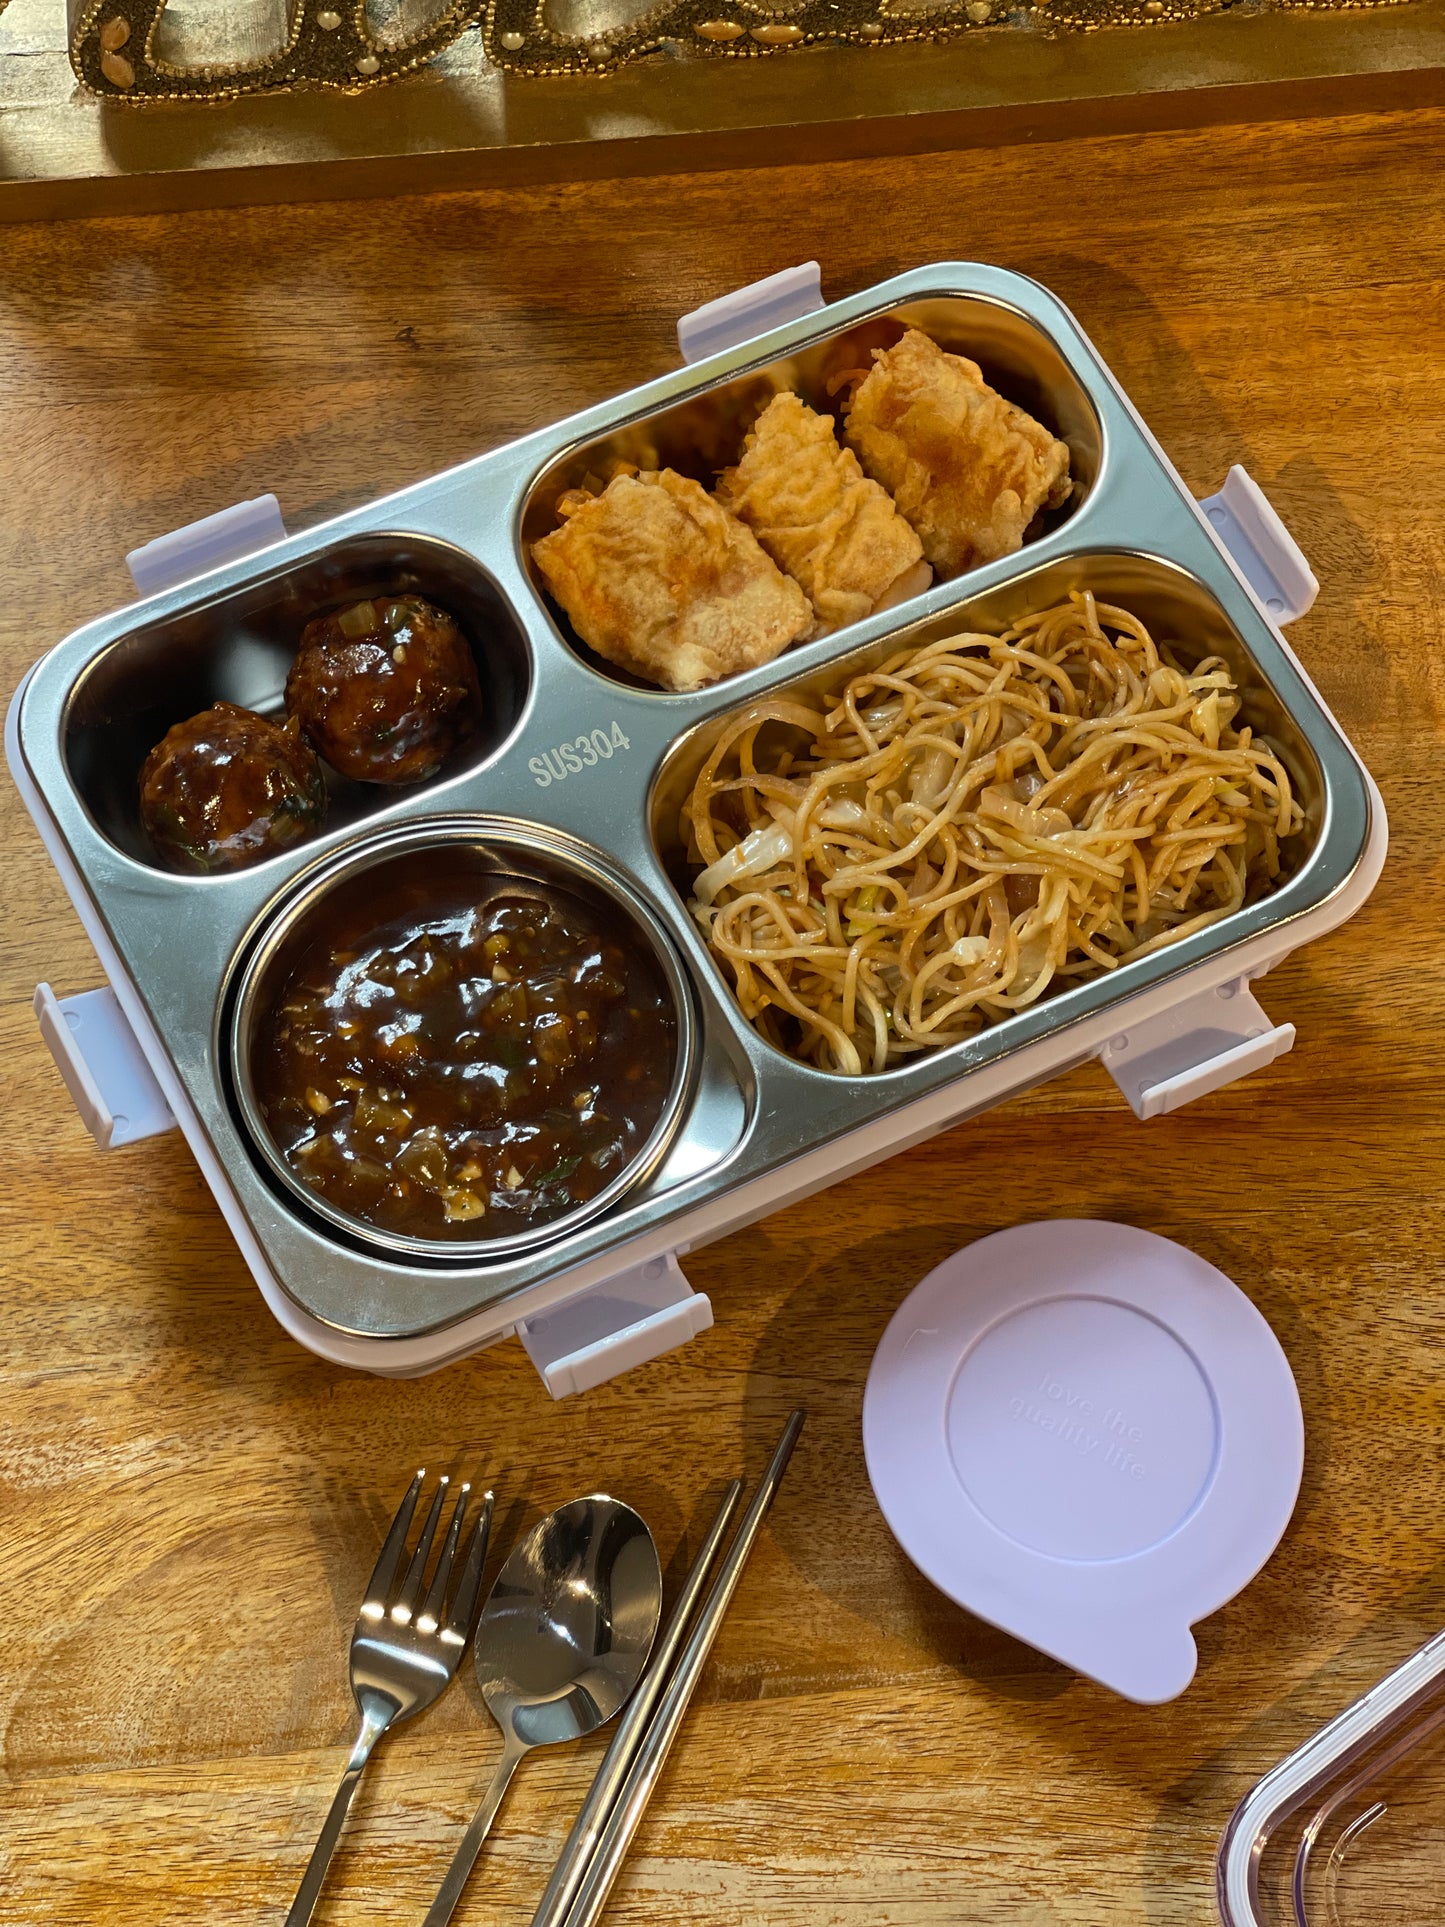 Meal Box Bento Stainless Steel Lunch Box